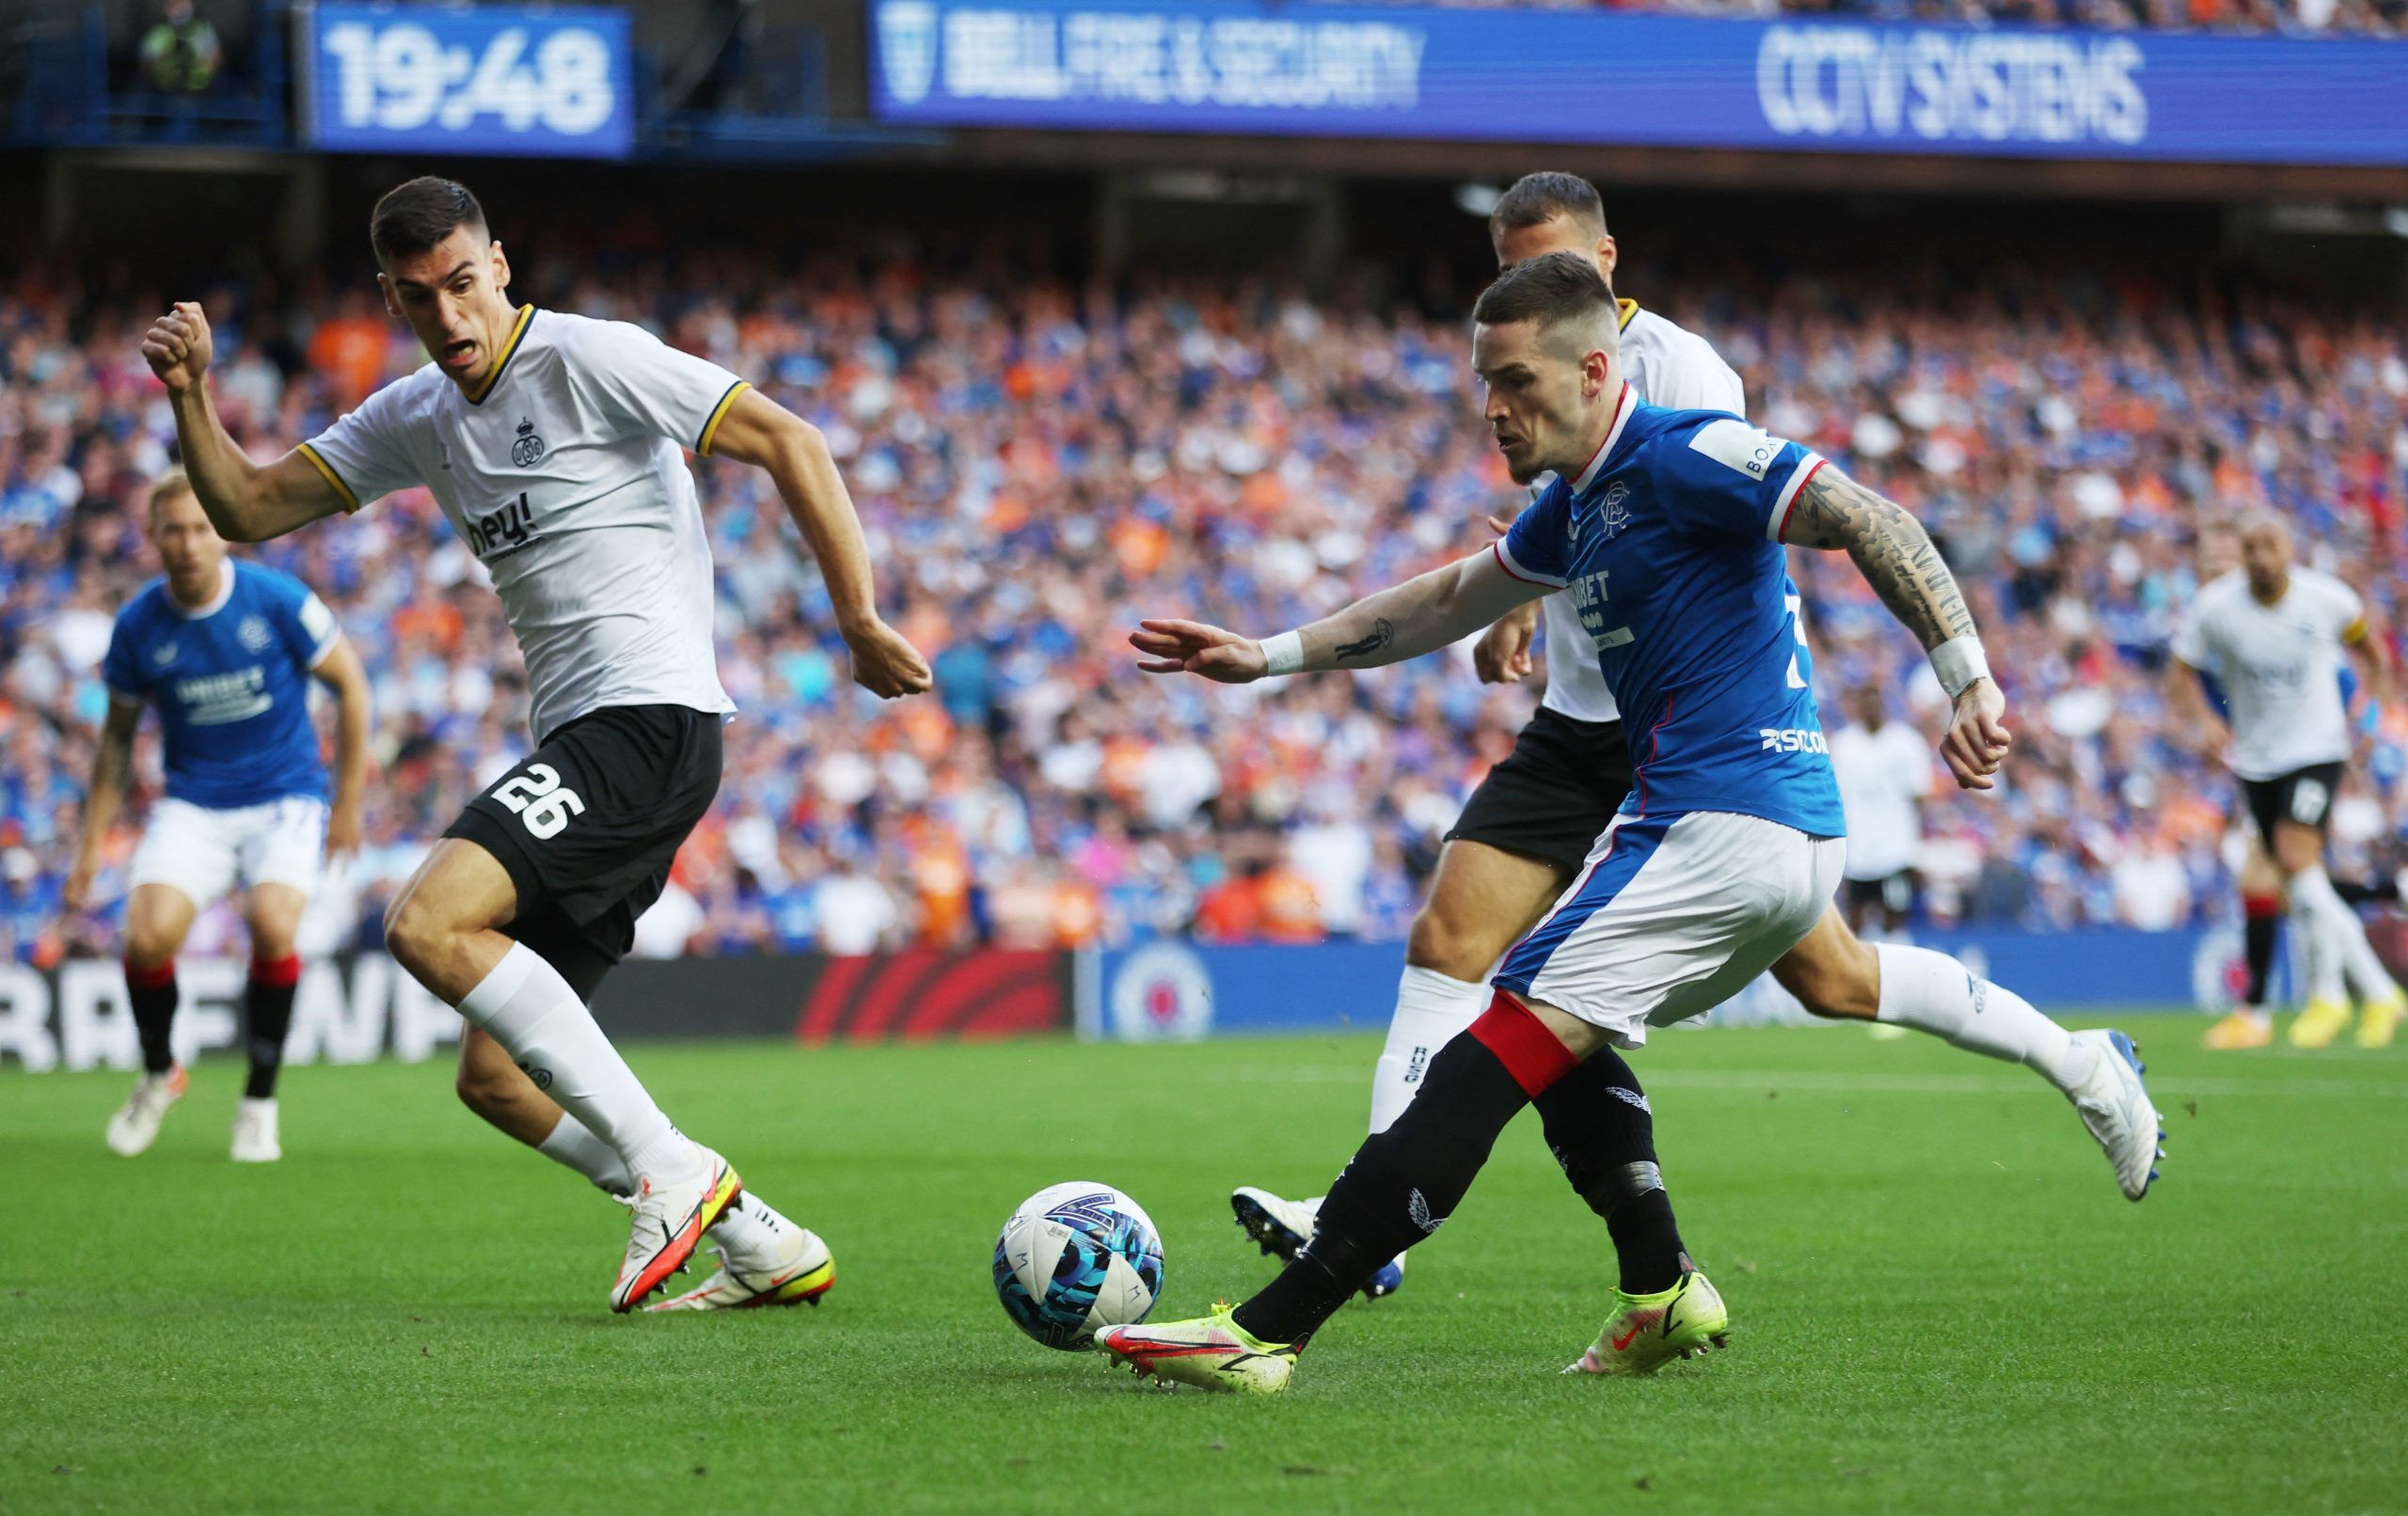 Rangers: Ryan Kent expected to receive ‘proposals’ ahead of January -Follow up